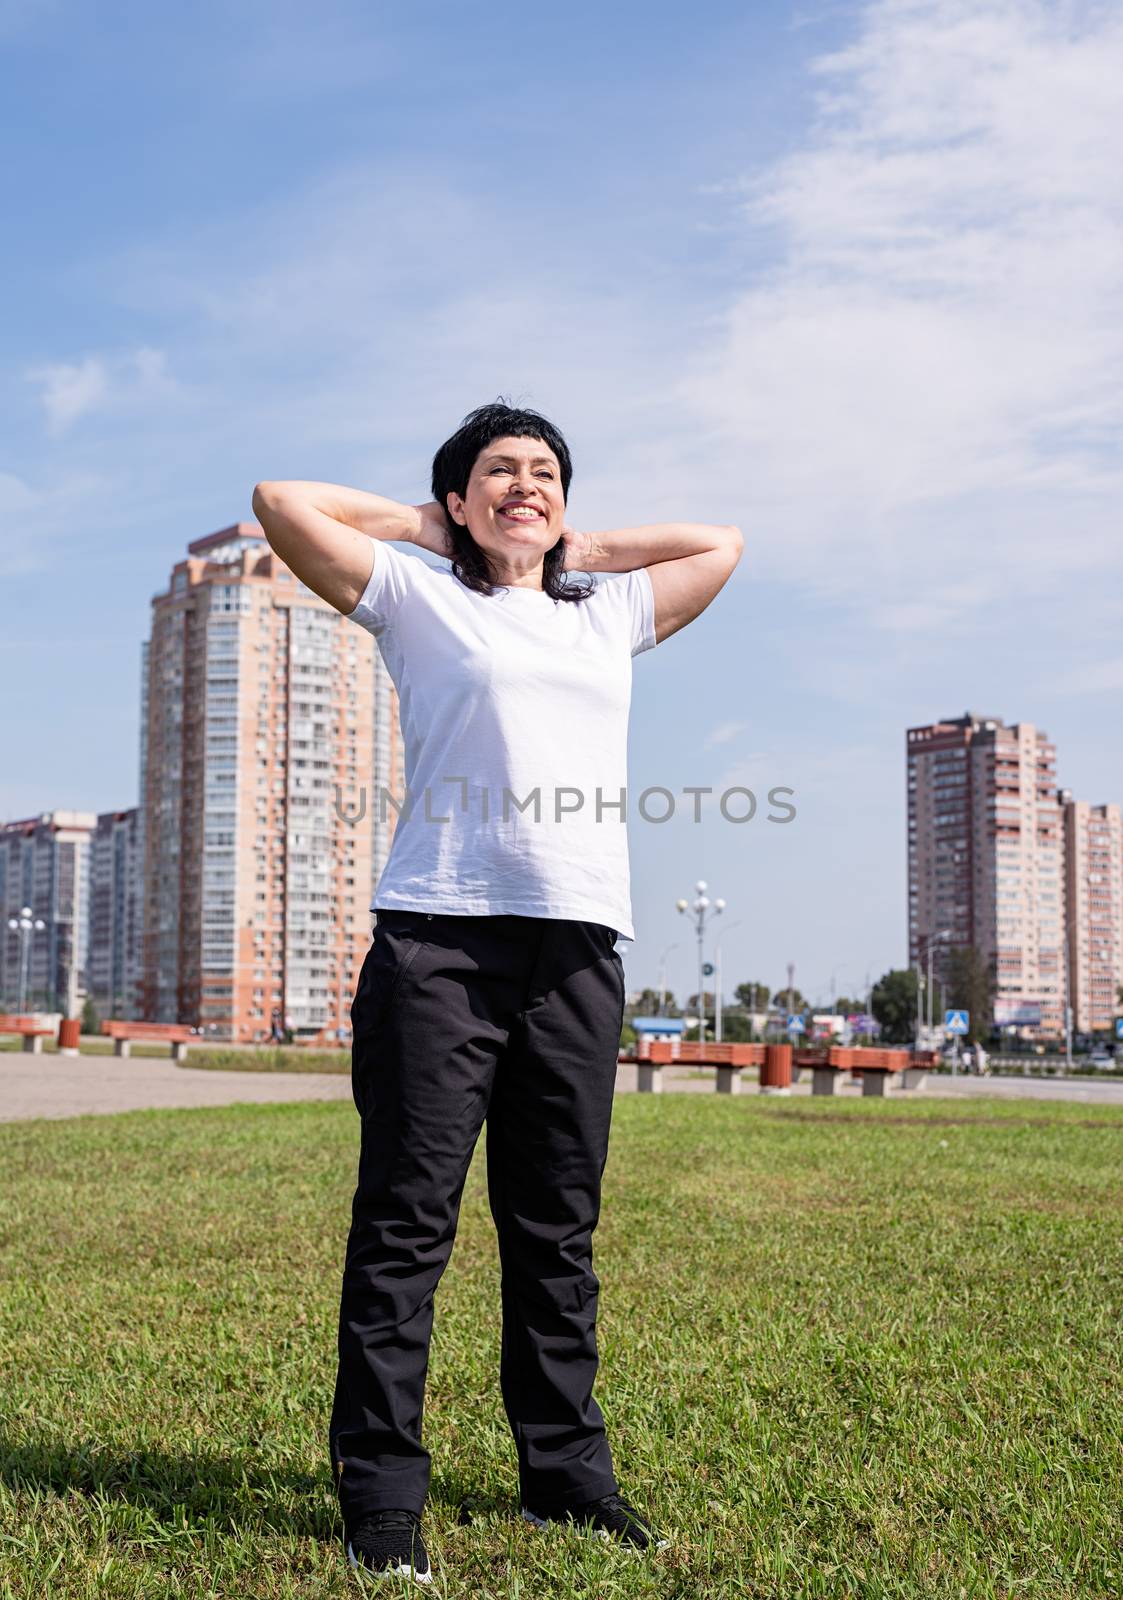 Sport and fitness. Senior sport. Active seniors. Smiling senior woman warming up before training outdoors in the park on urban background